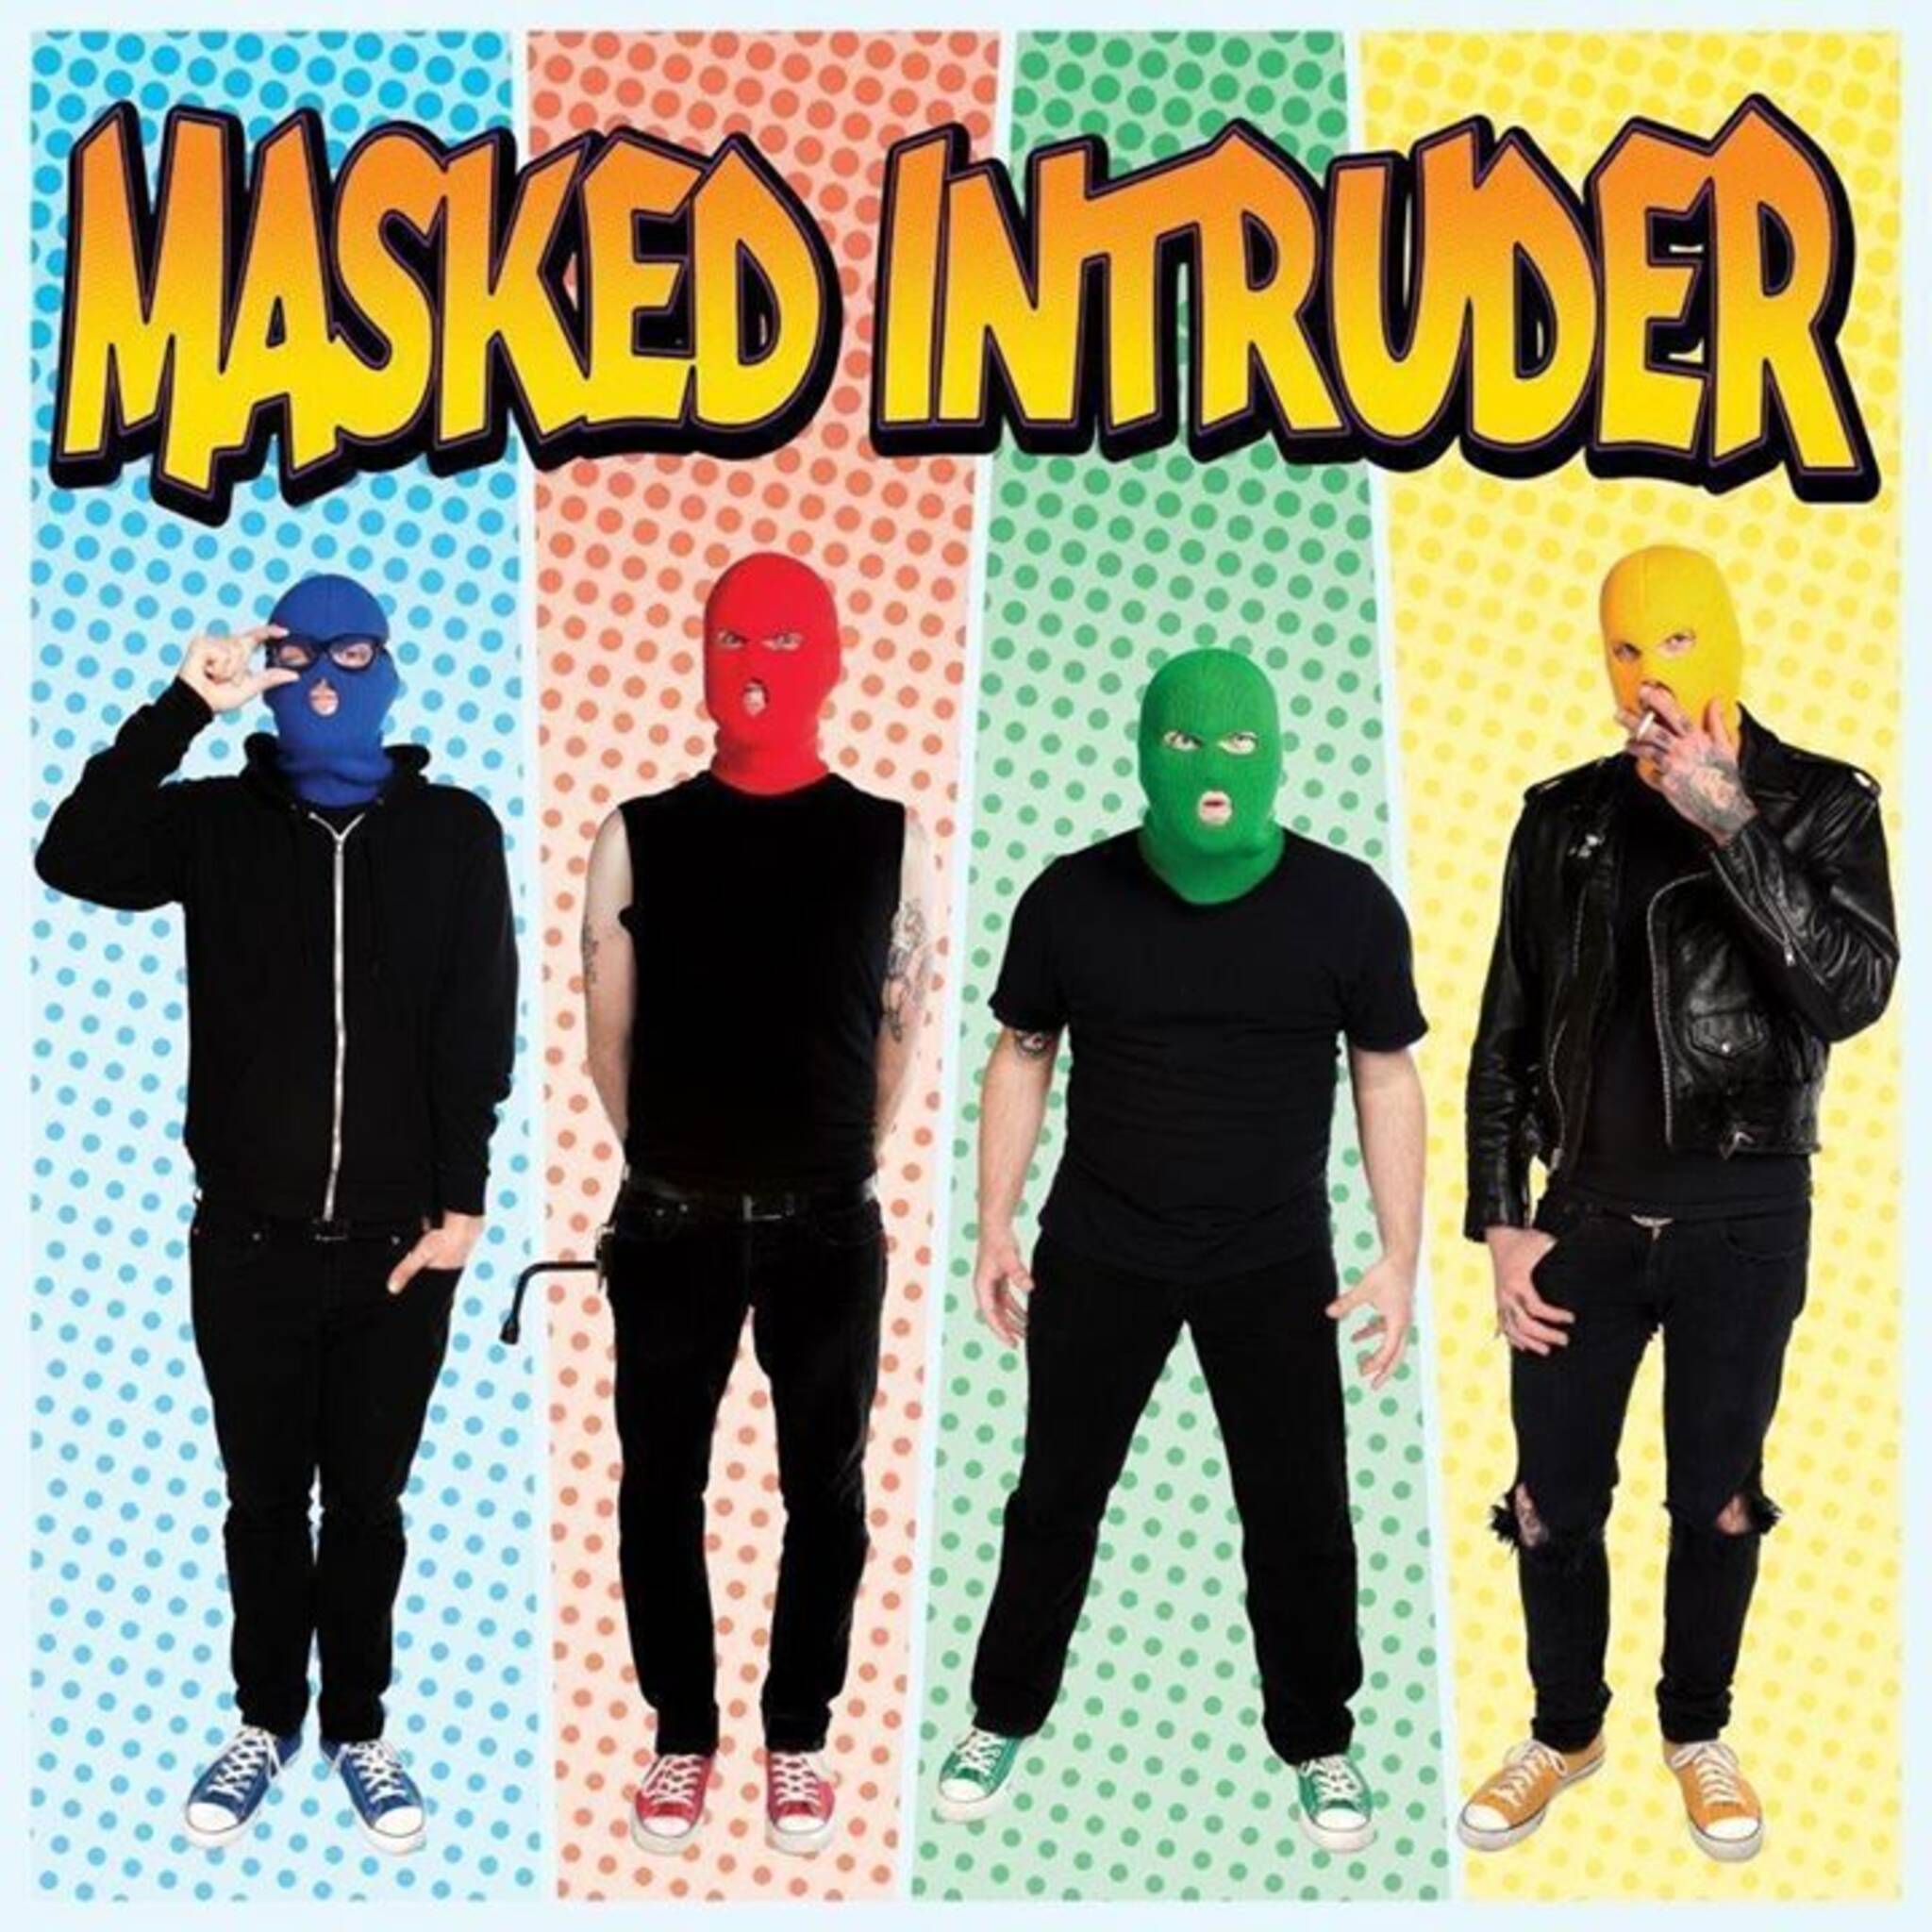 Masked Intruder, & Direct Hit! with Priceduifkes & !Attention! at The